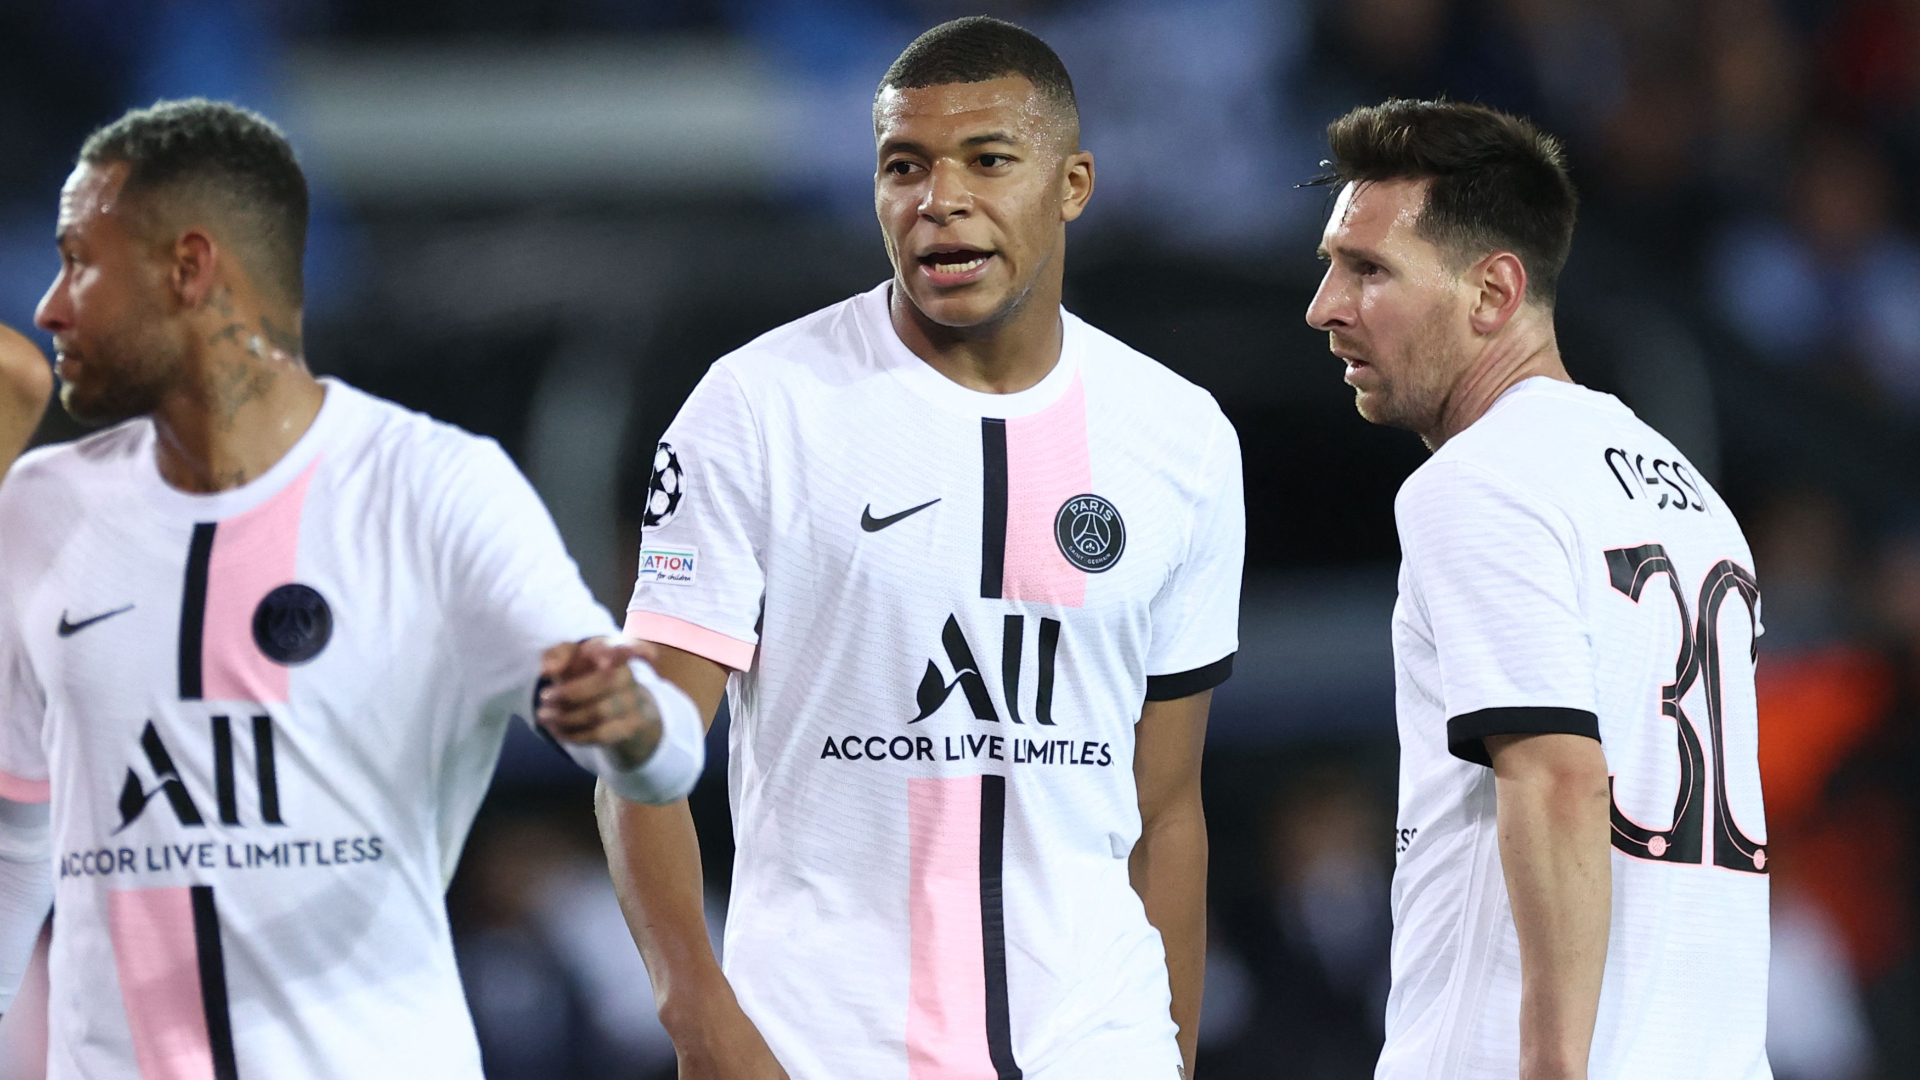 Mbappe admits to calling Neymar a ‘bum’ in bench outburst but insists there is no rift at PSG